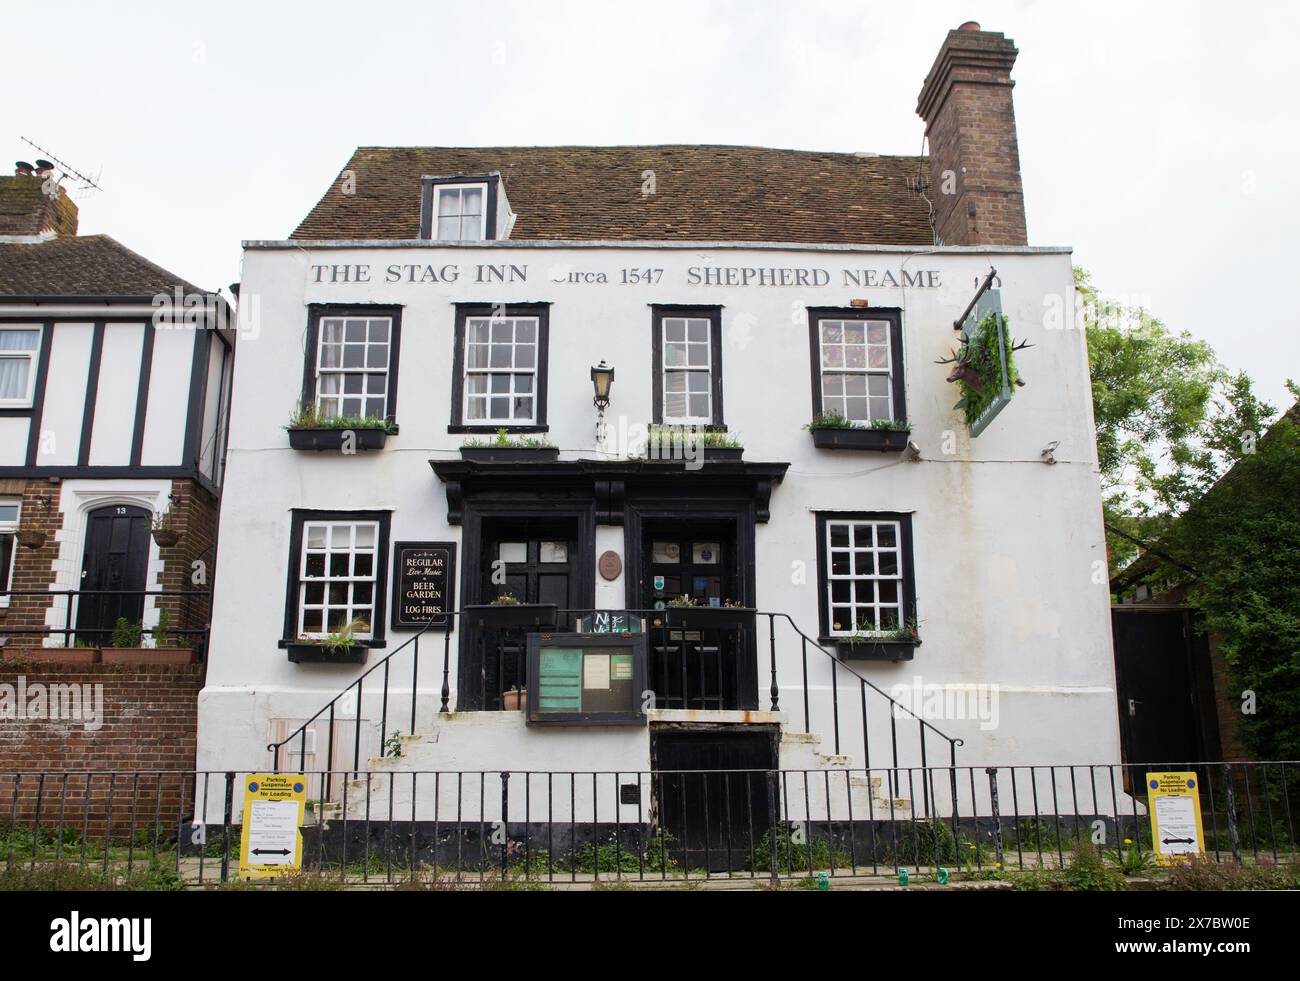 Le Stag Inn All Saints Street Hastings UK Banque D'Images